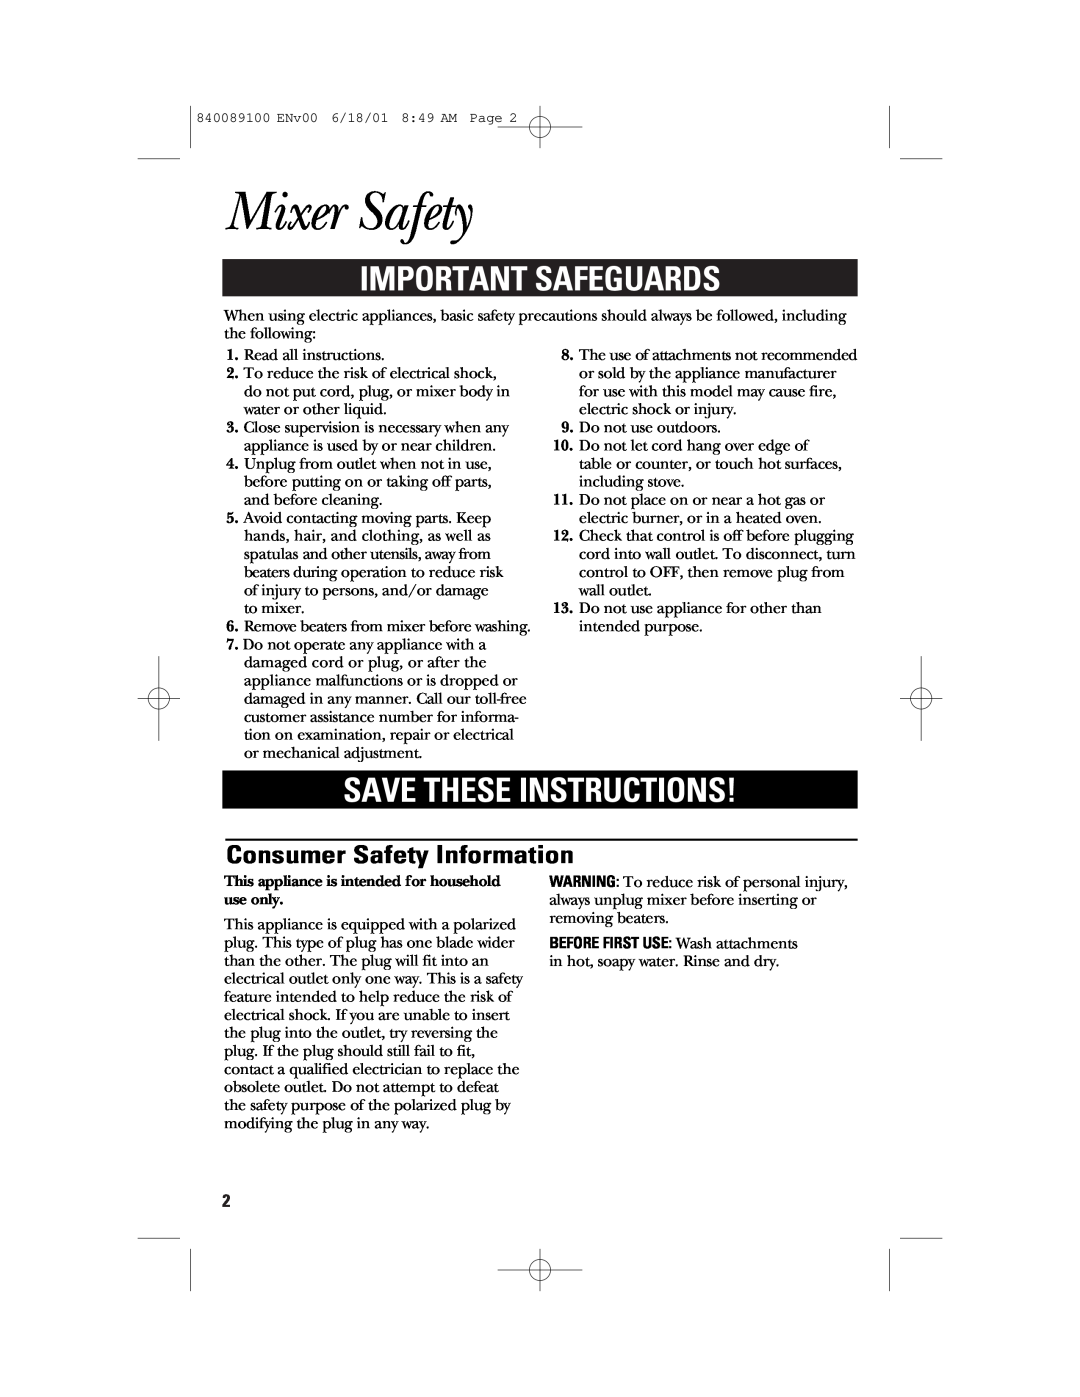 GE 106742 manual Mixer Safety, Important Safeguards, Save These Instructions, Consumer Safety Information 